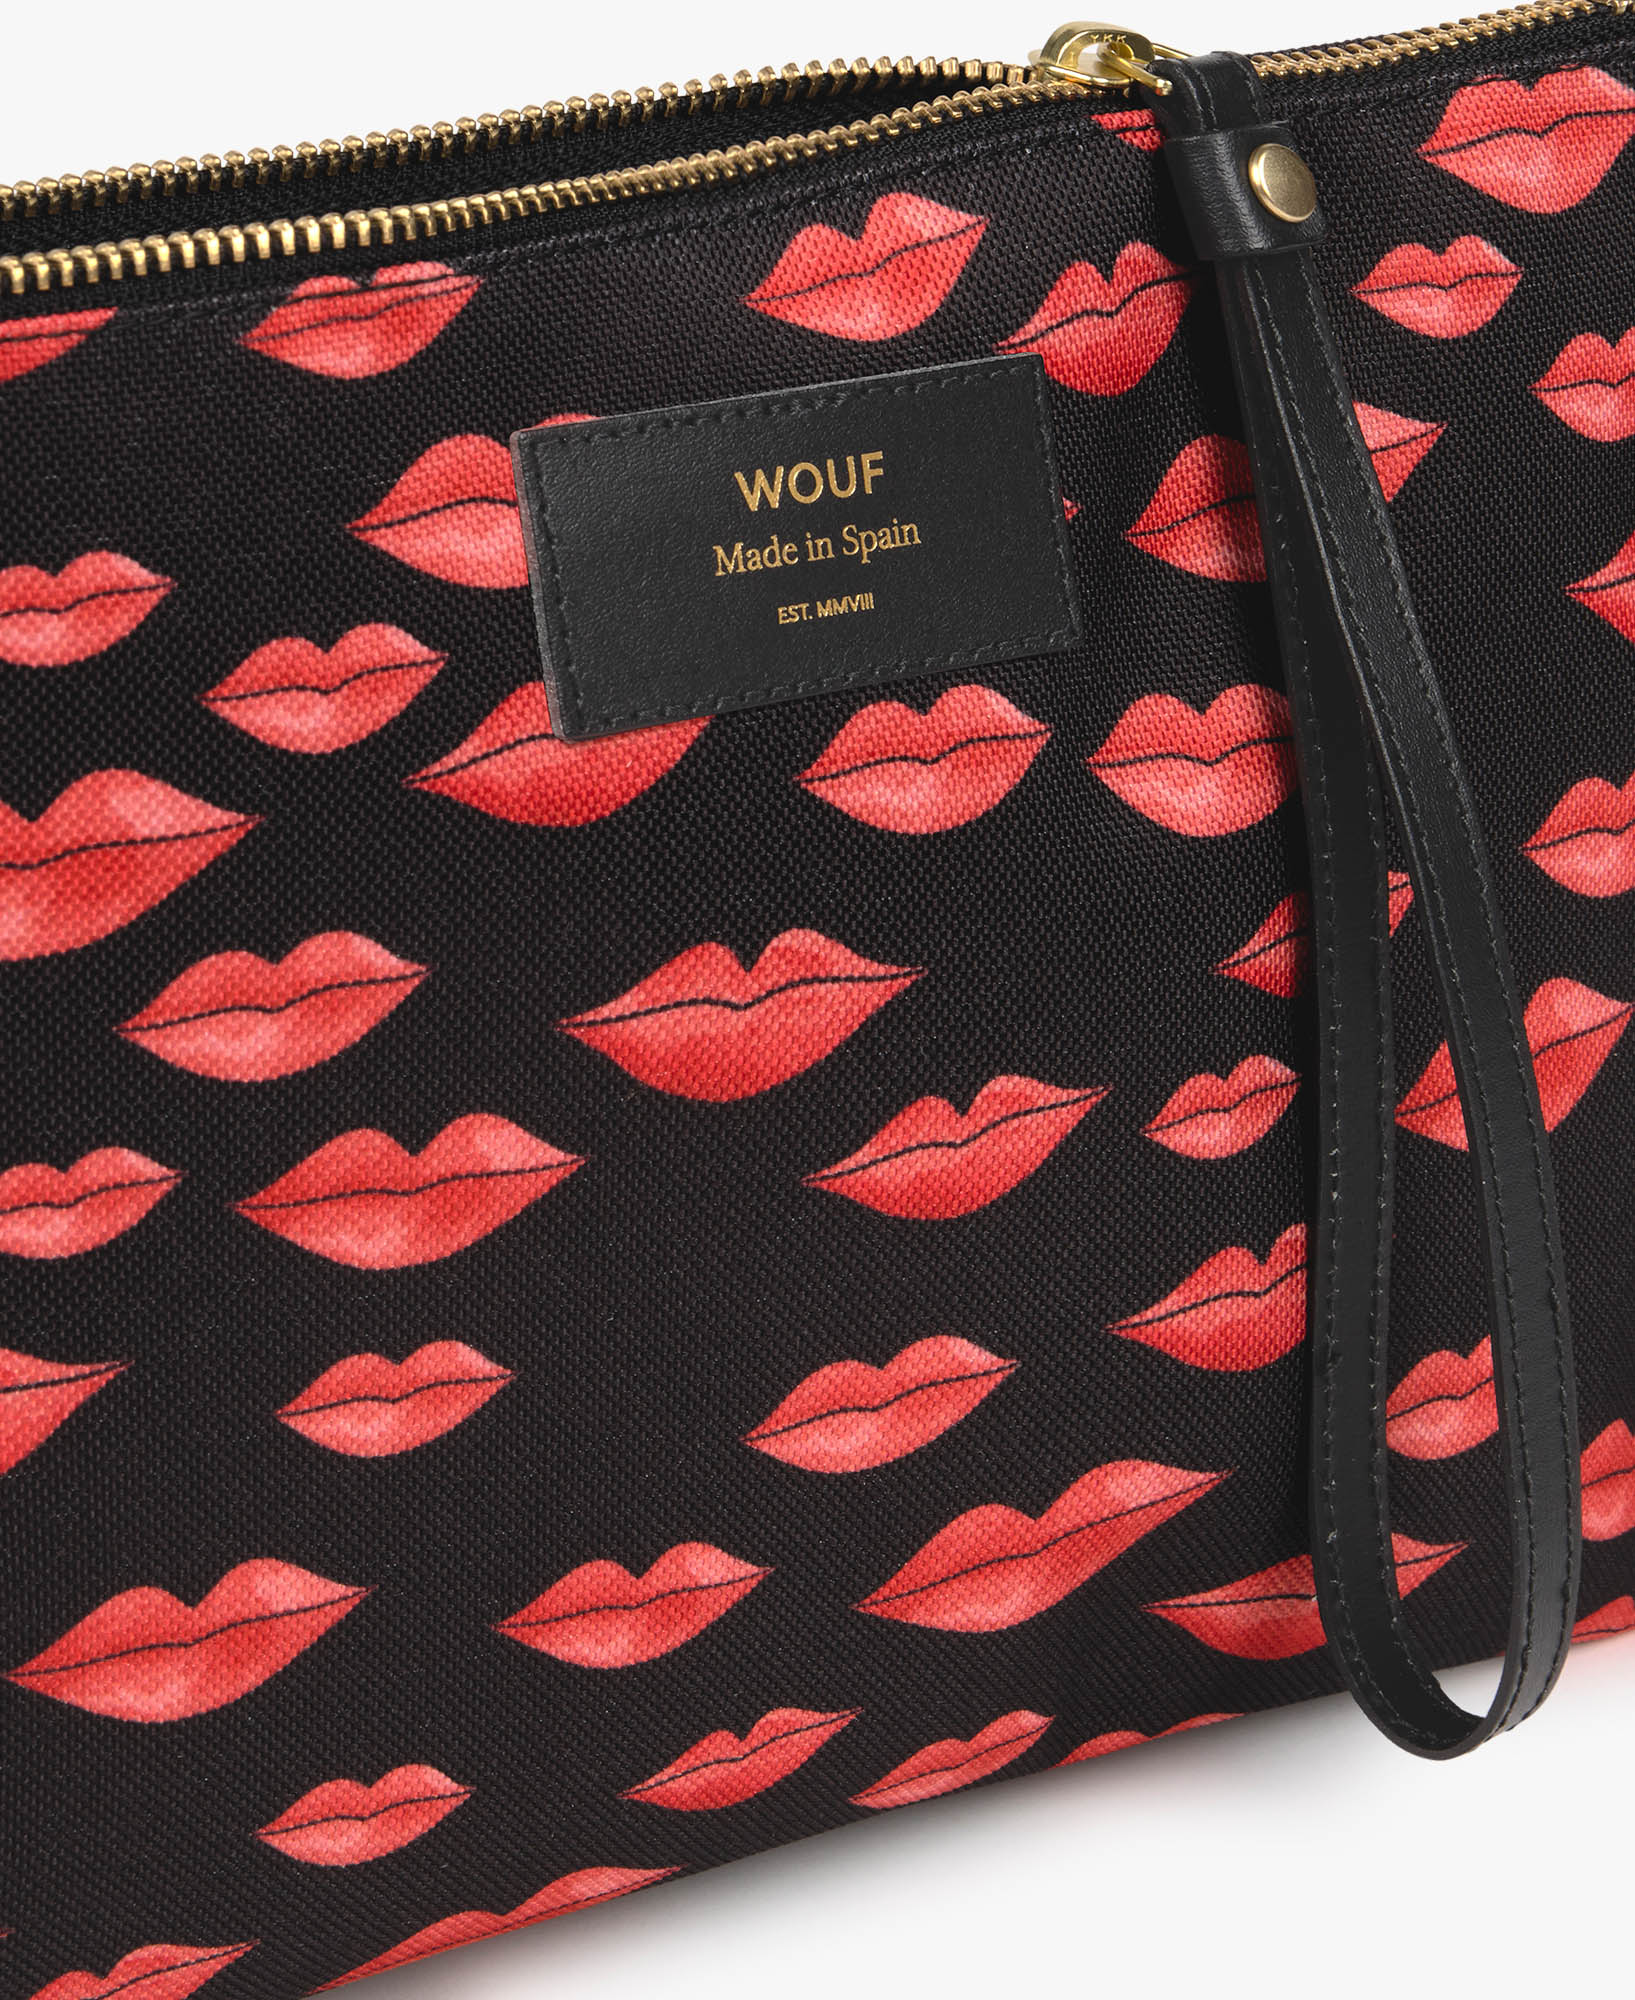 WOUF-XL-Pouch-Beso-Label